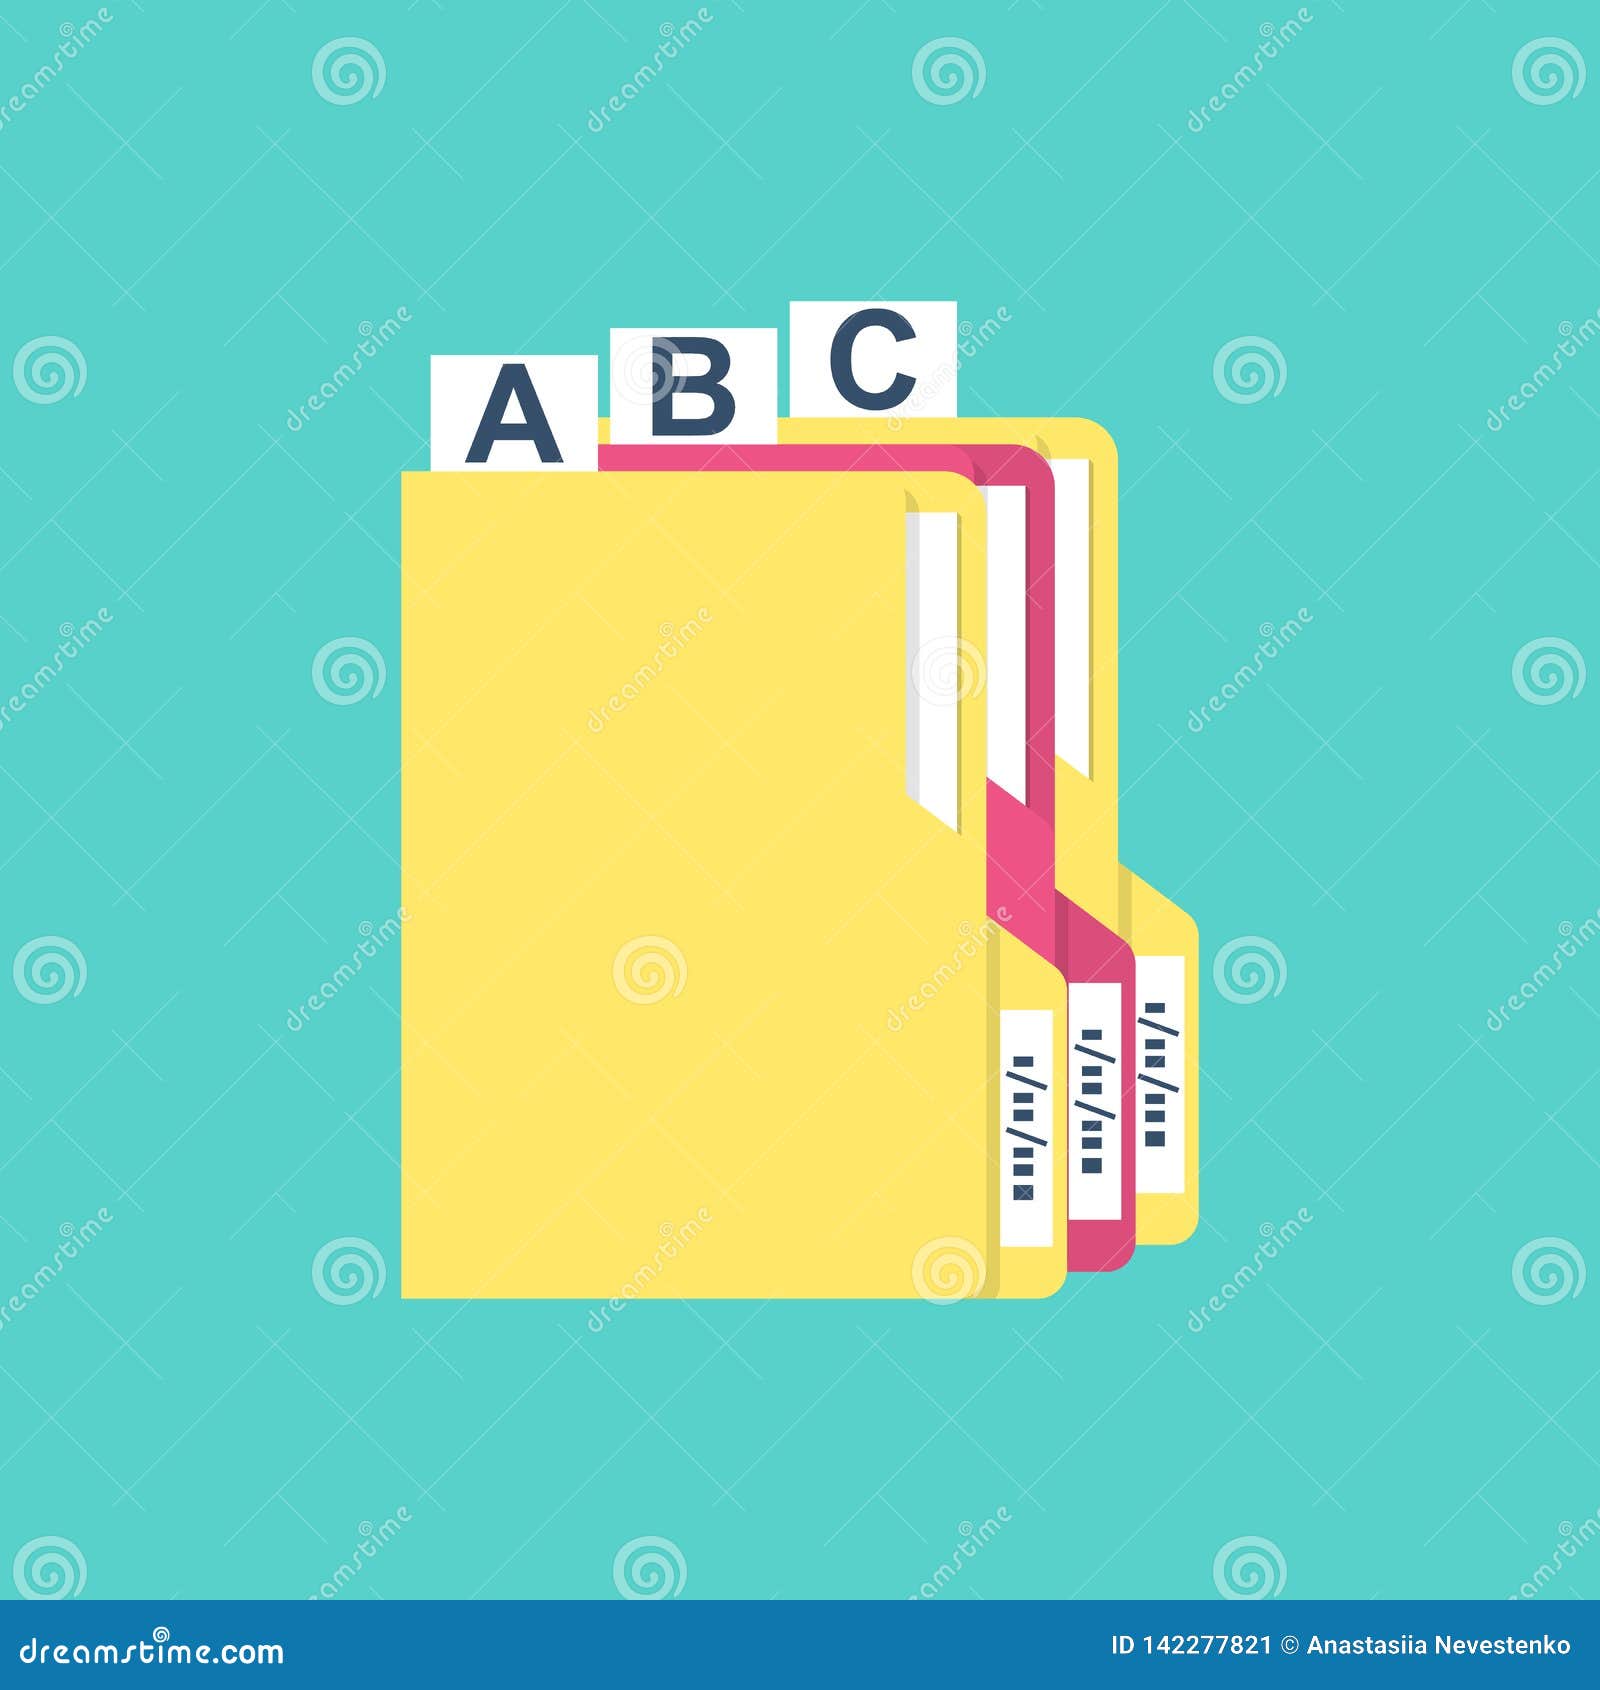 https://thumbs.dreamstime.com/z/card-index-icon-directory-documents-numbering-archive-alphabetical-registration-catalog-address-colored-folders-vector-142277821.jpg